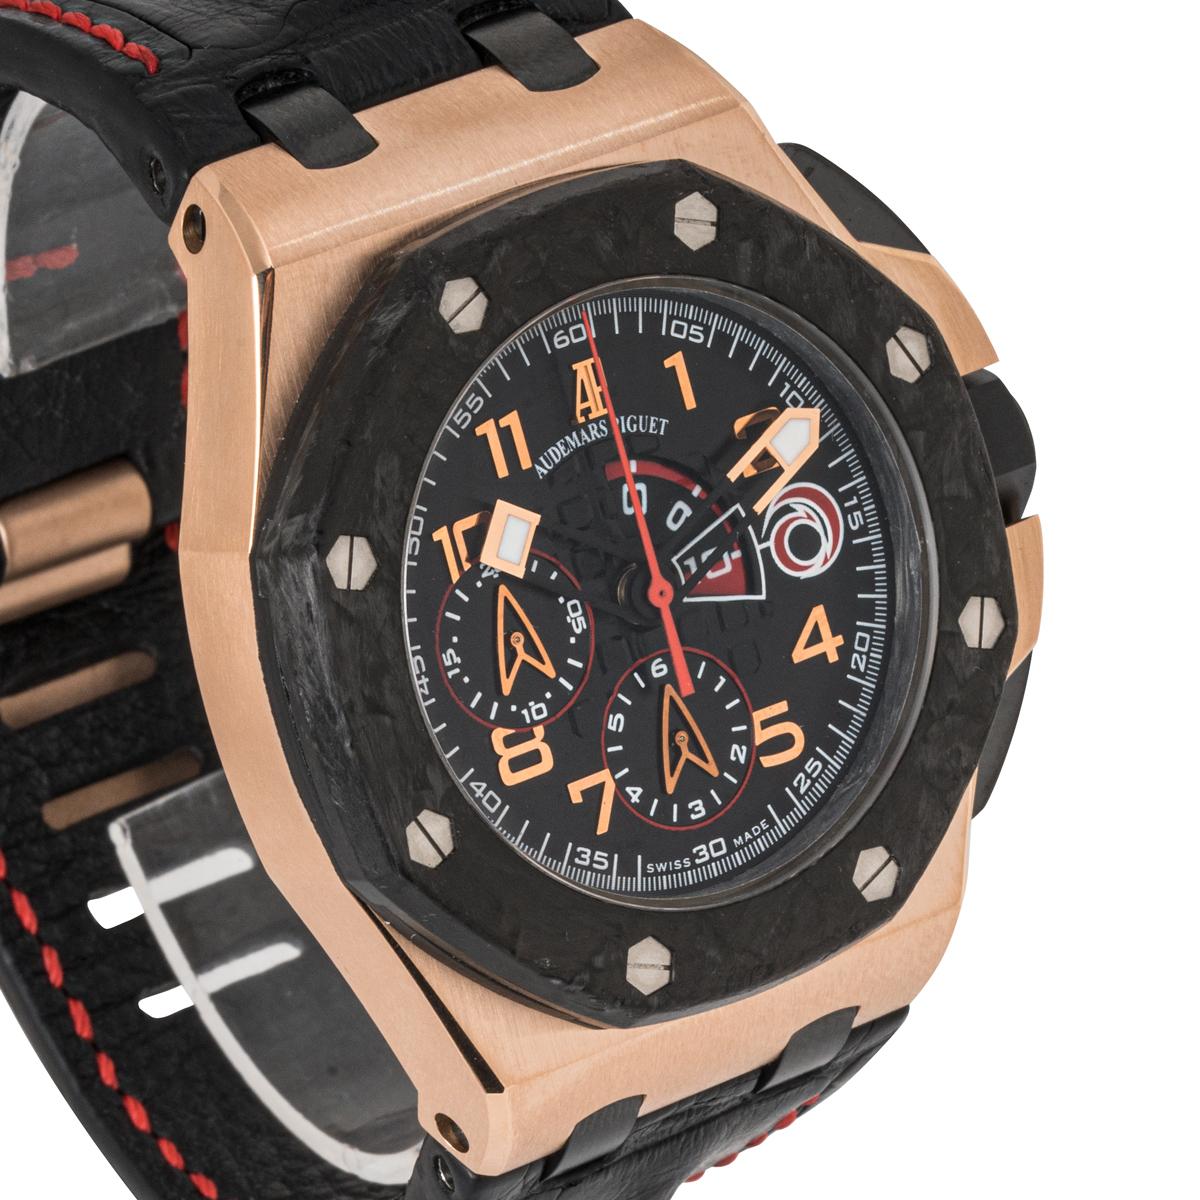 Audemars Piguet Royal Oak Offshore Team Alinghi 26062OR.OO.A002CA.01 In Excellent Condition For Sale In London, GB